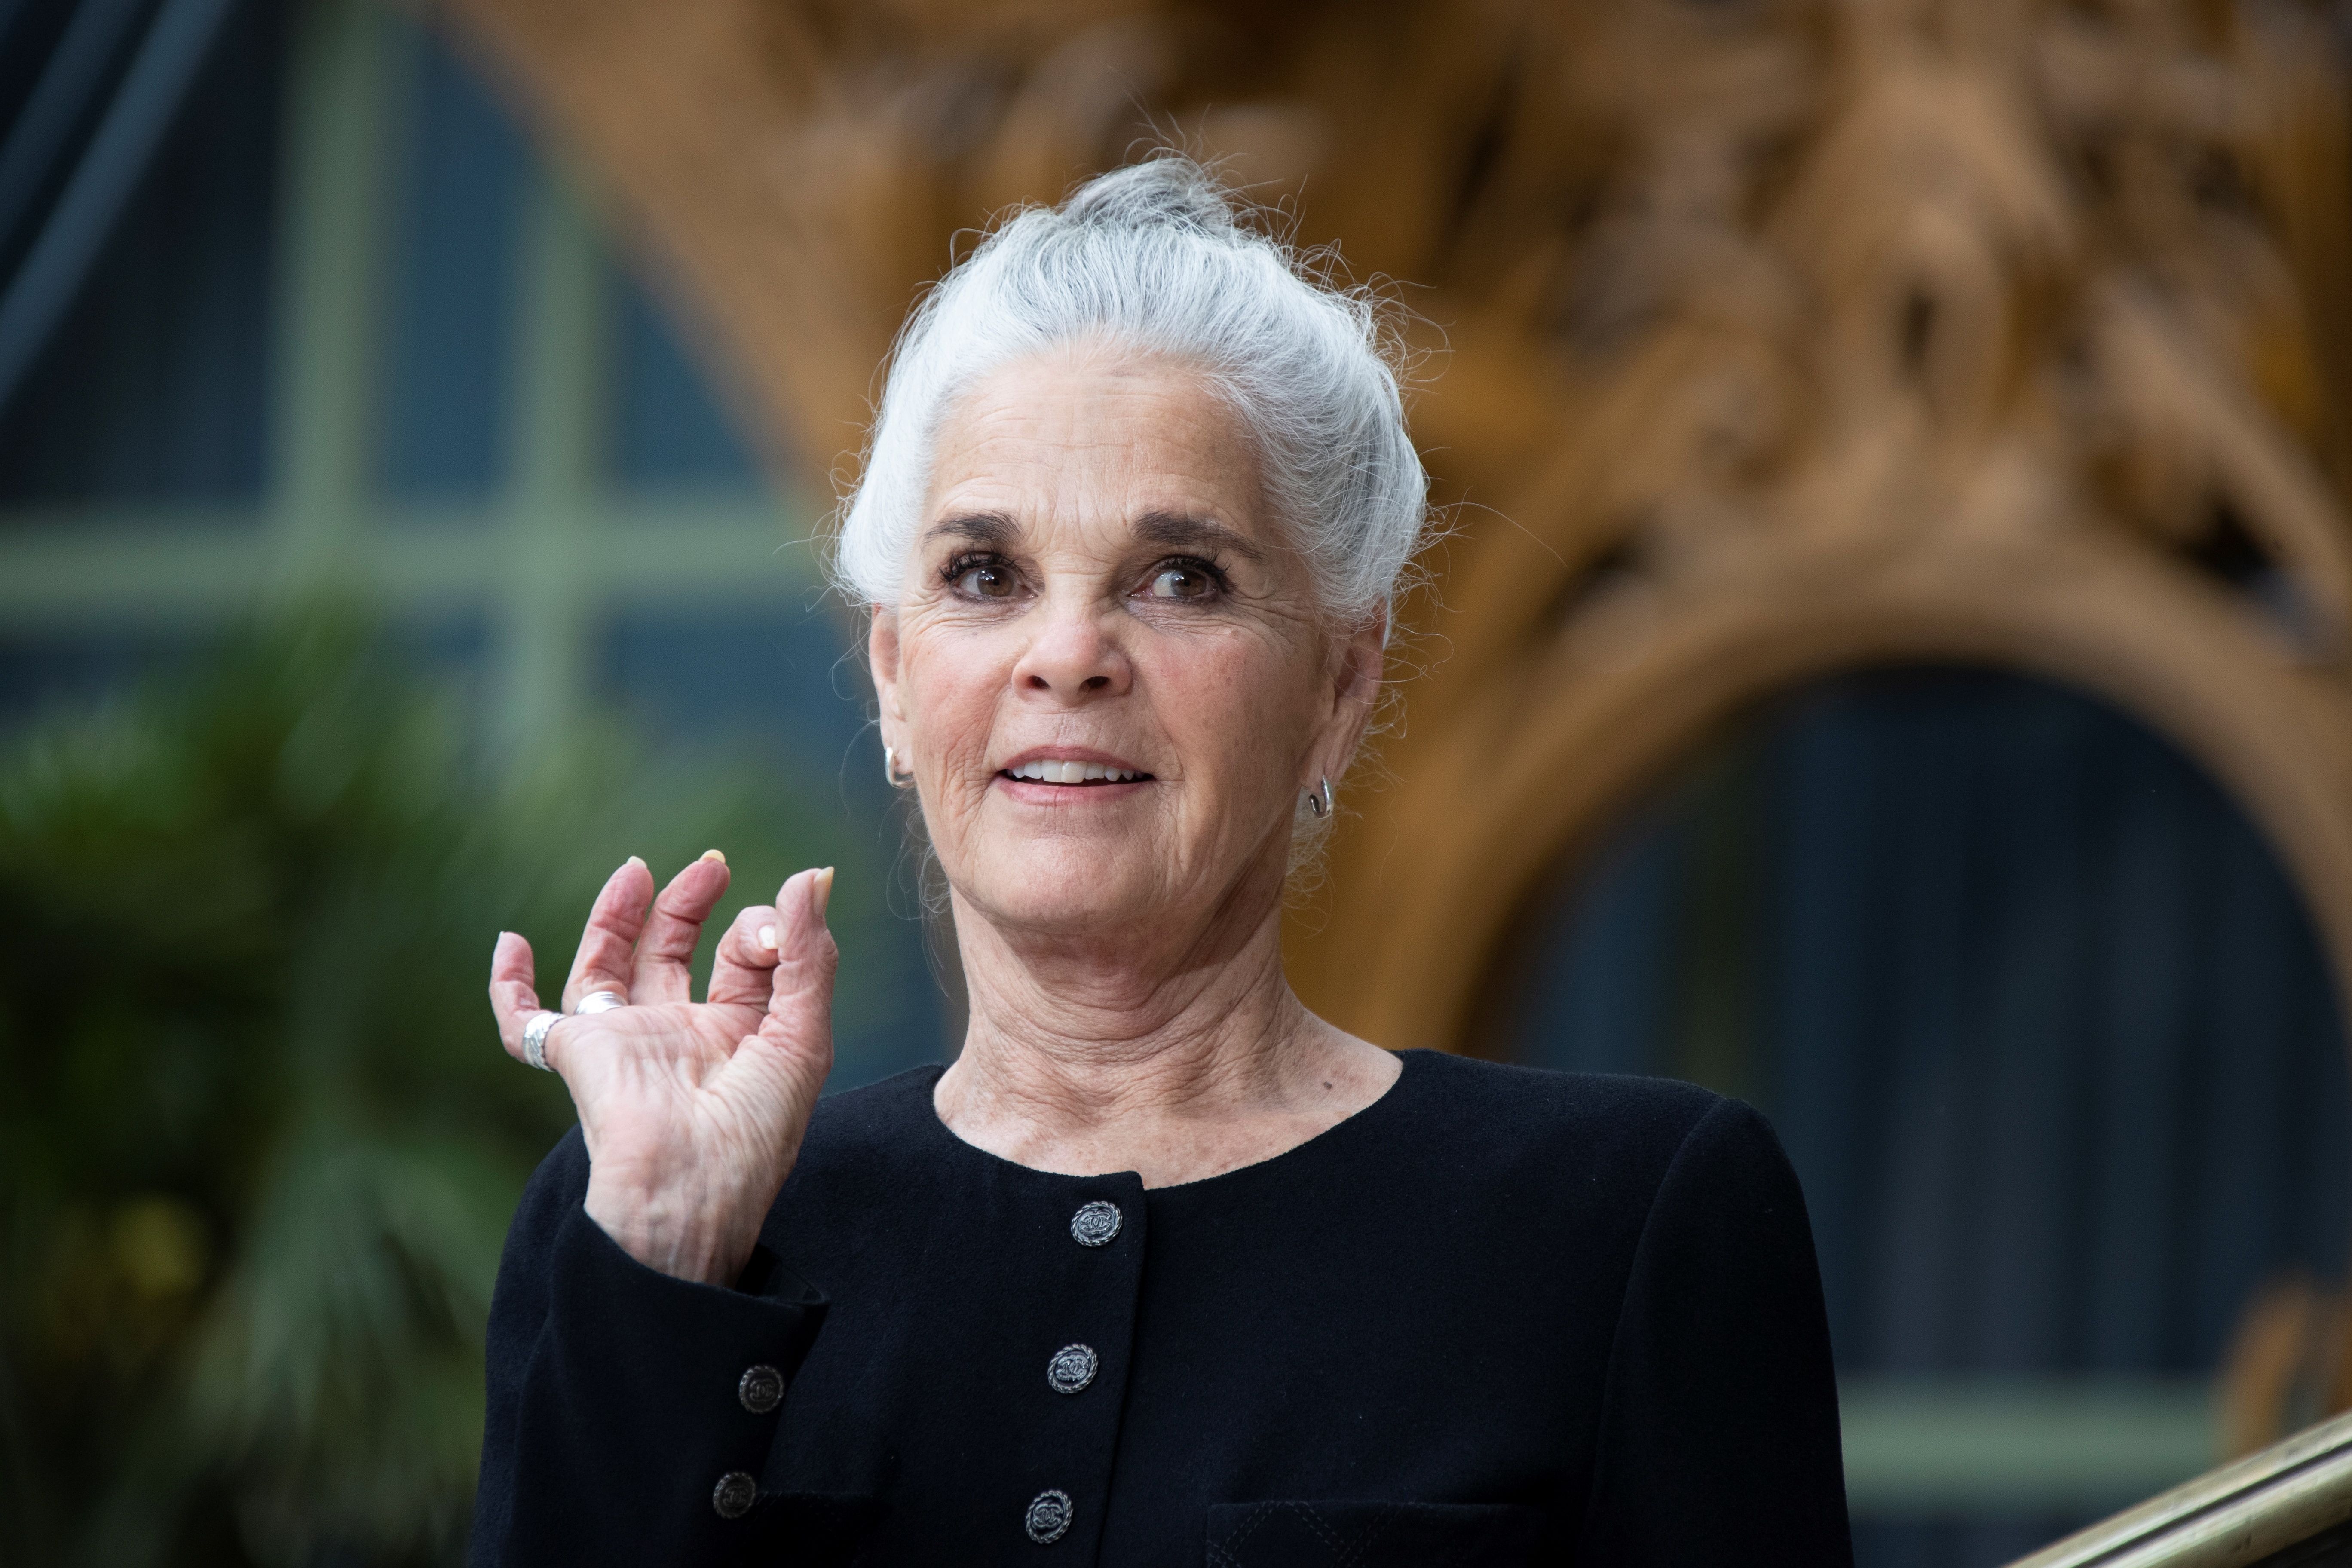 US actress Ali MacGraw poses during the photocall prior to the 2020 Chanel Croisiere (Cruise) fashion show at the Grand Palais in Paris on May 3, 2019. | Photo: Getty Images